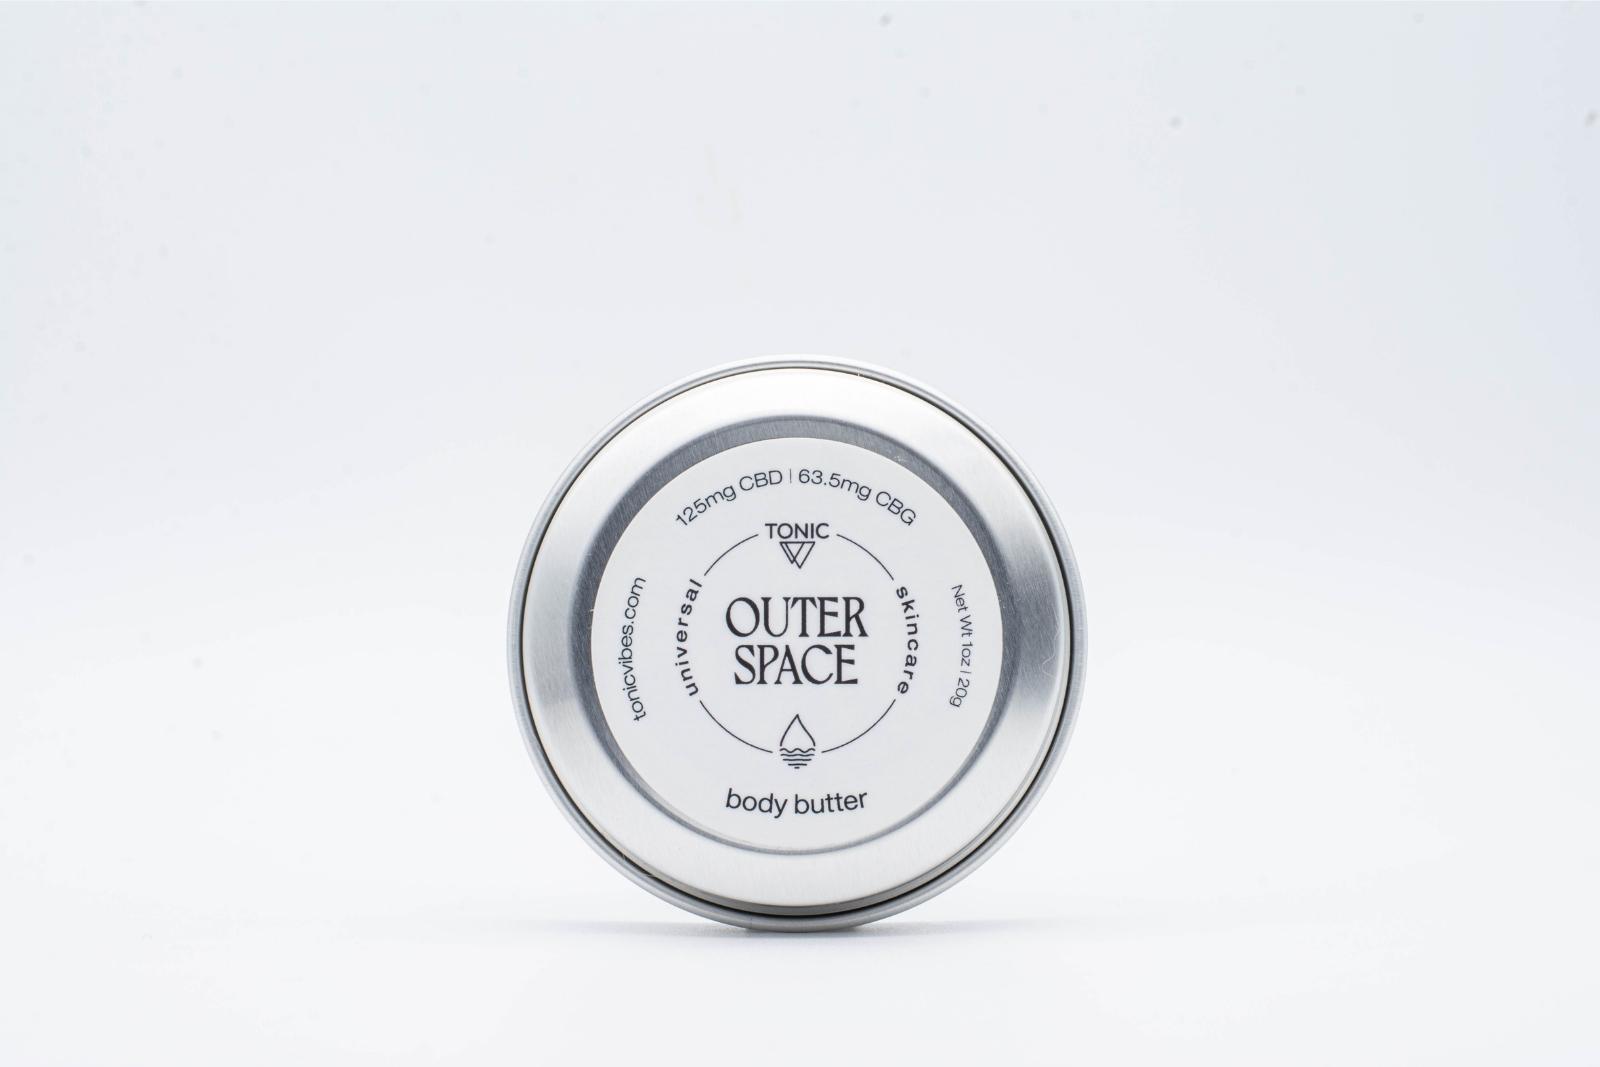 One small can of Tonic's Outer Space CBD + CBG body butter, on a white background